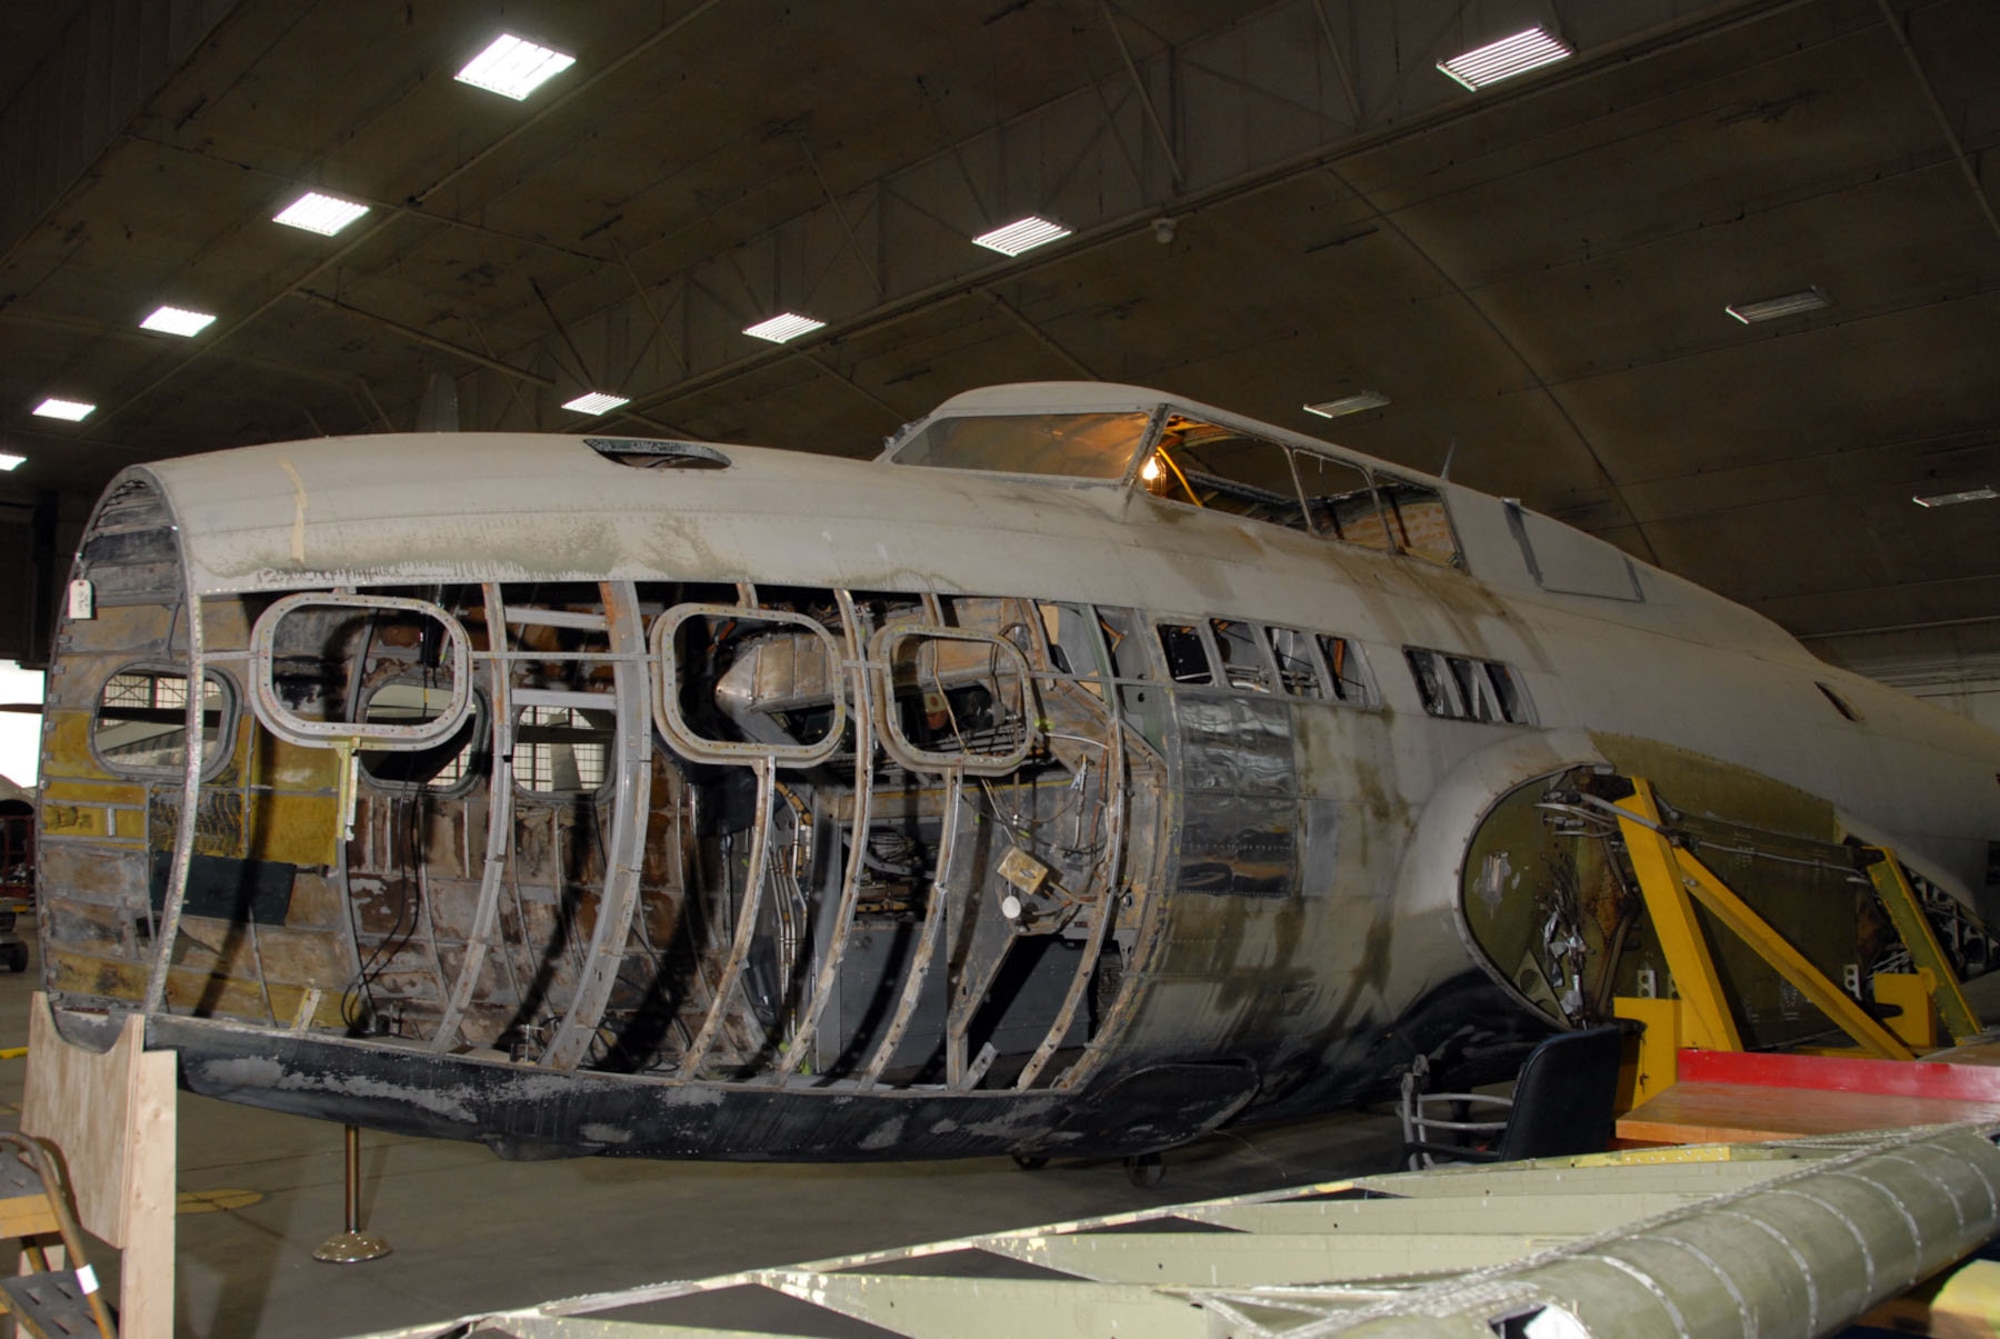 DAYTON, Ohio (6/2/2009) - The B-17D The Swoose in the restoration hangar at the National Museum of the U.S. Air Force. (U.S. Air Force photo)